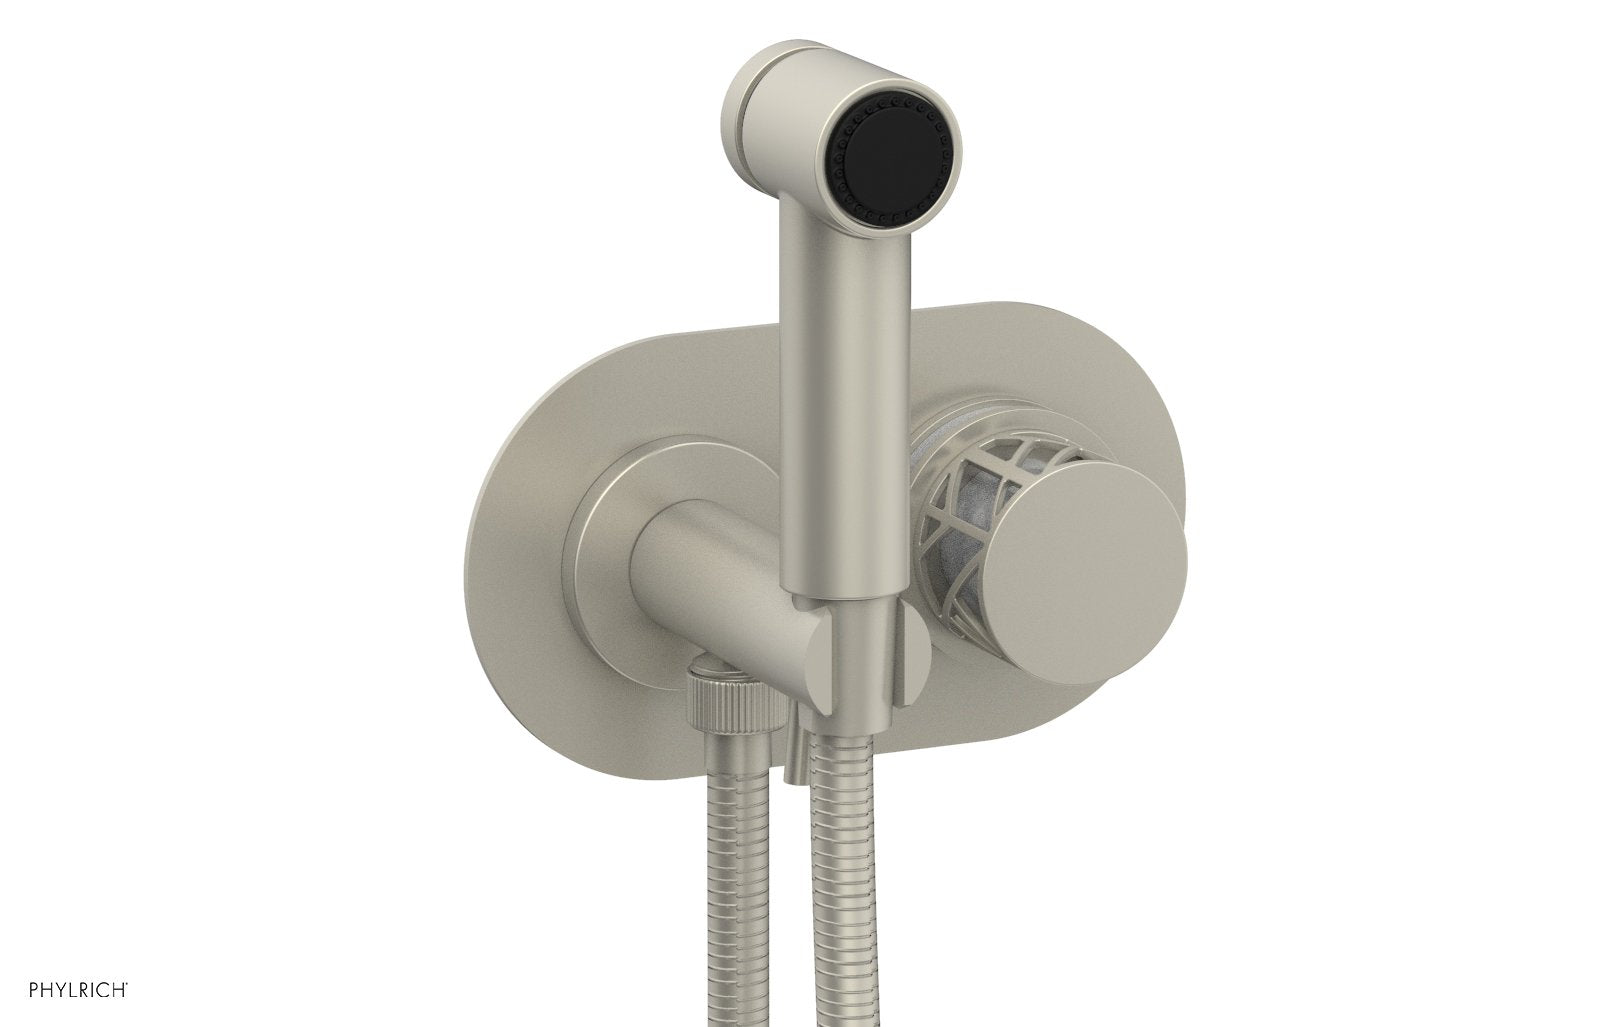 Phylrich JOLIE Wall Mounted Bidet, Round Handle with "White" Accents